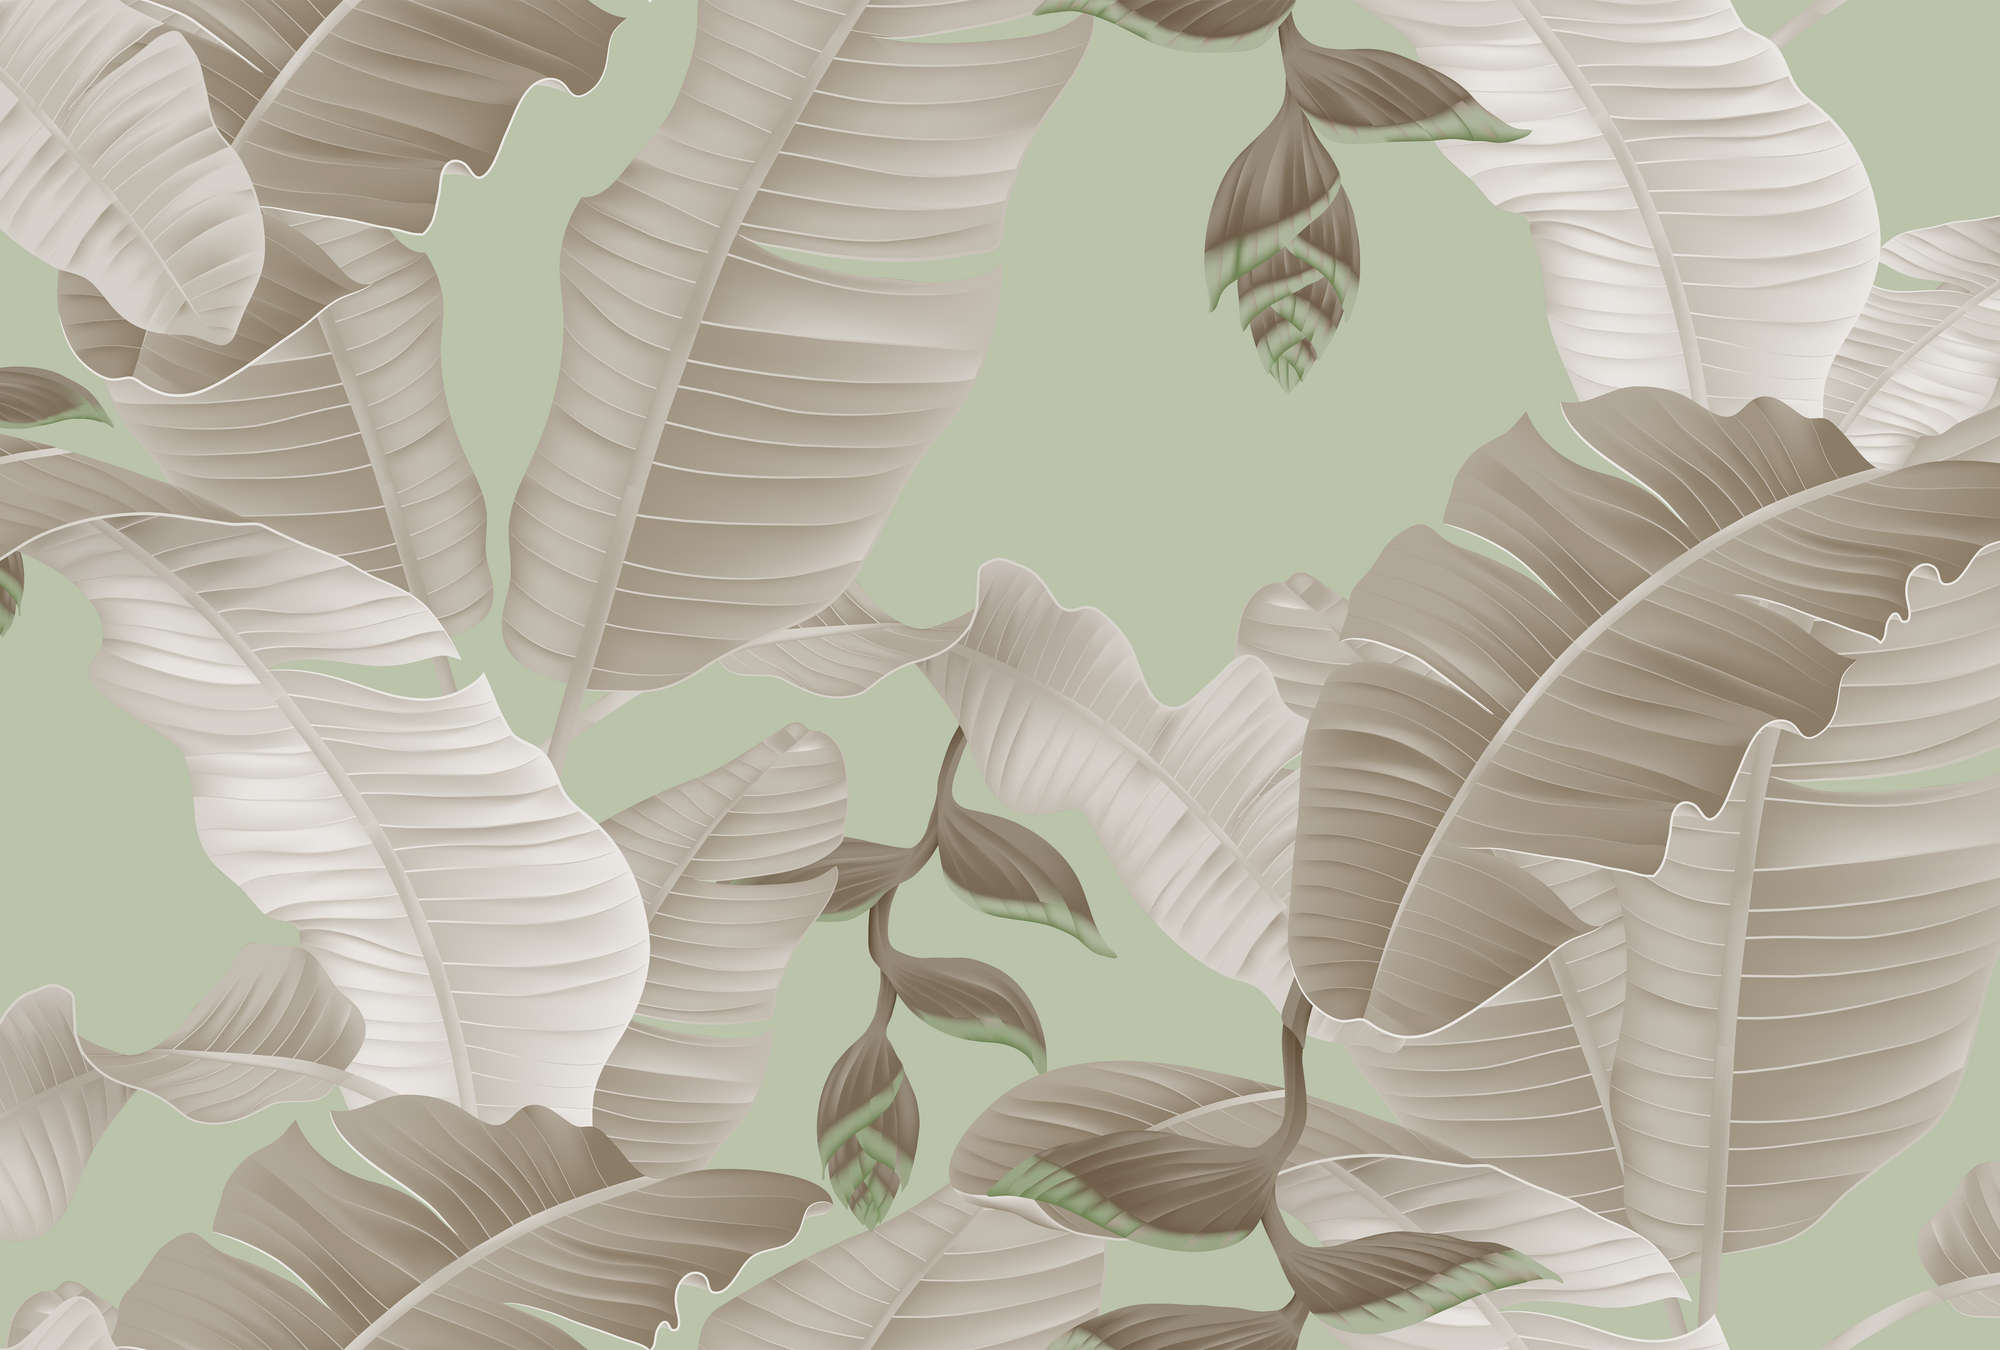             Palm leaves graphic style mural - green, grey
        